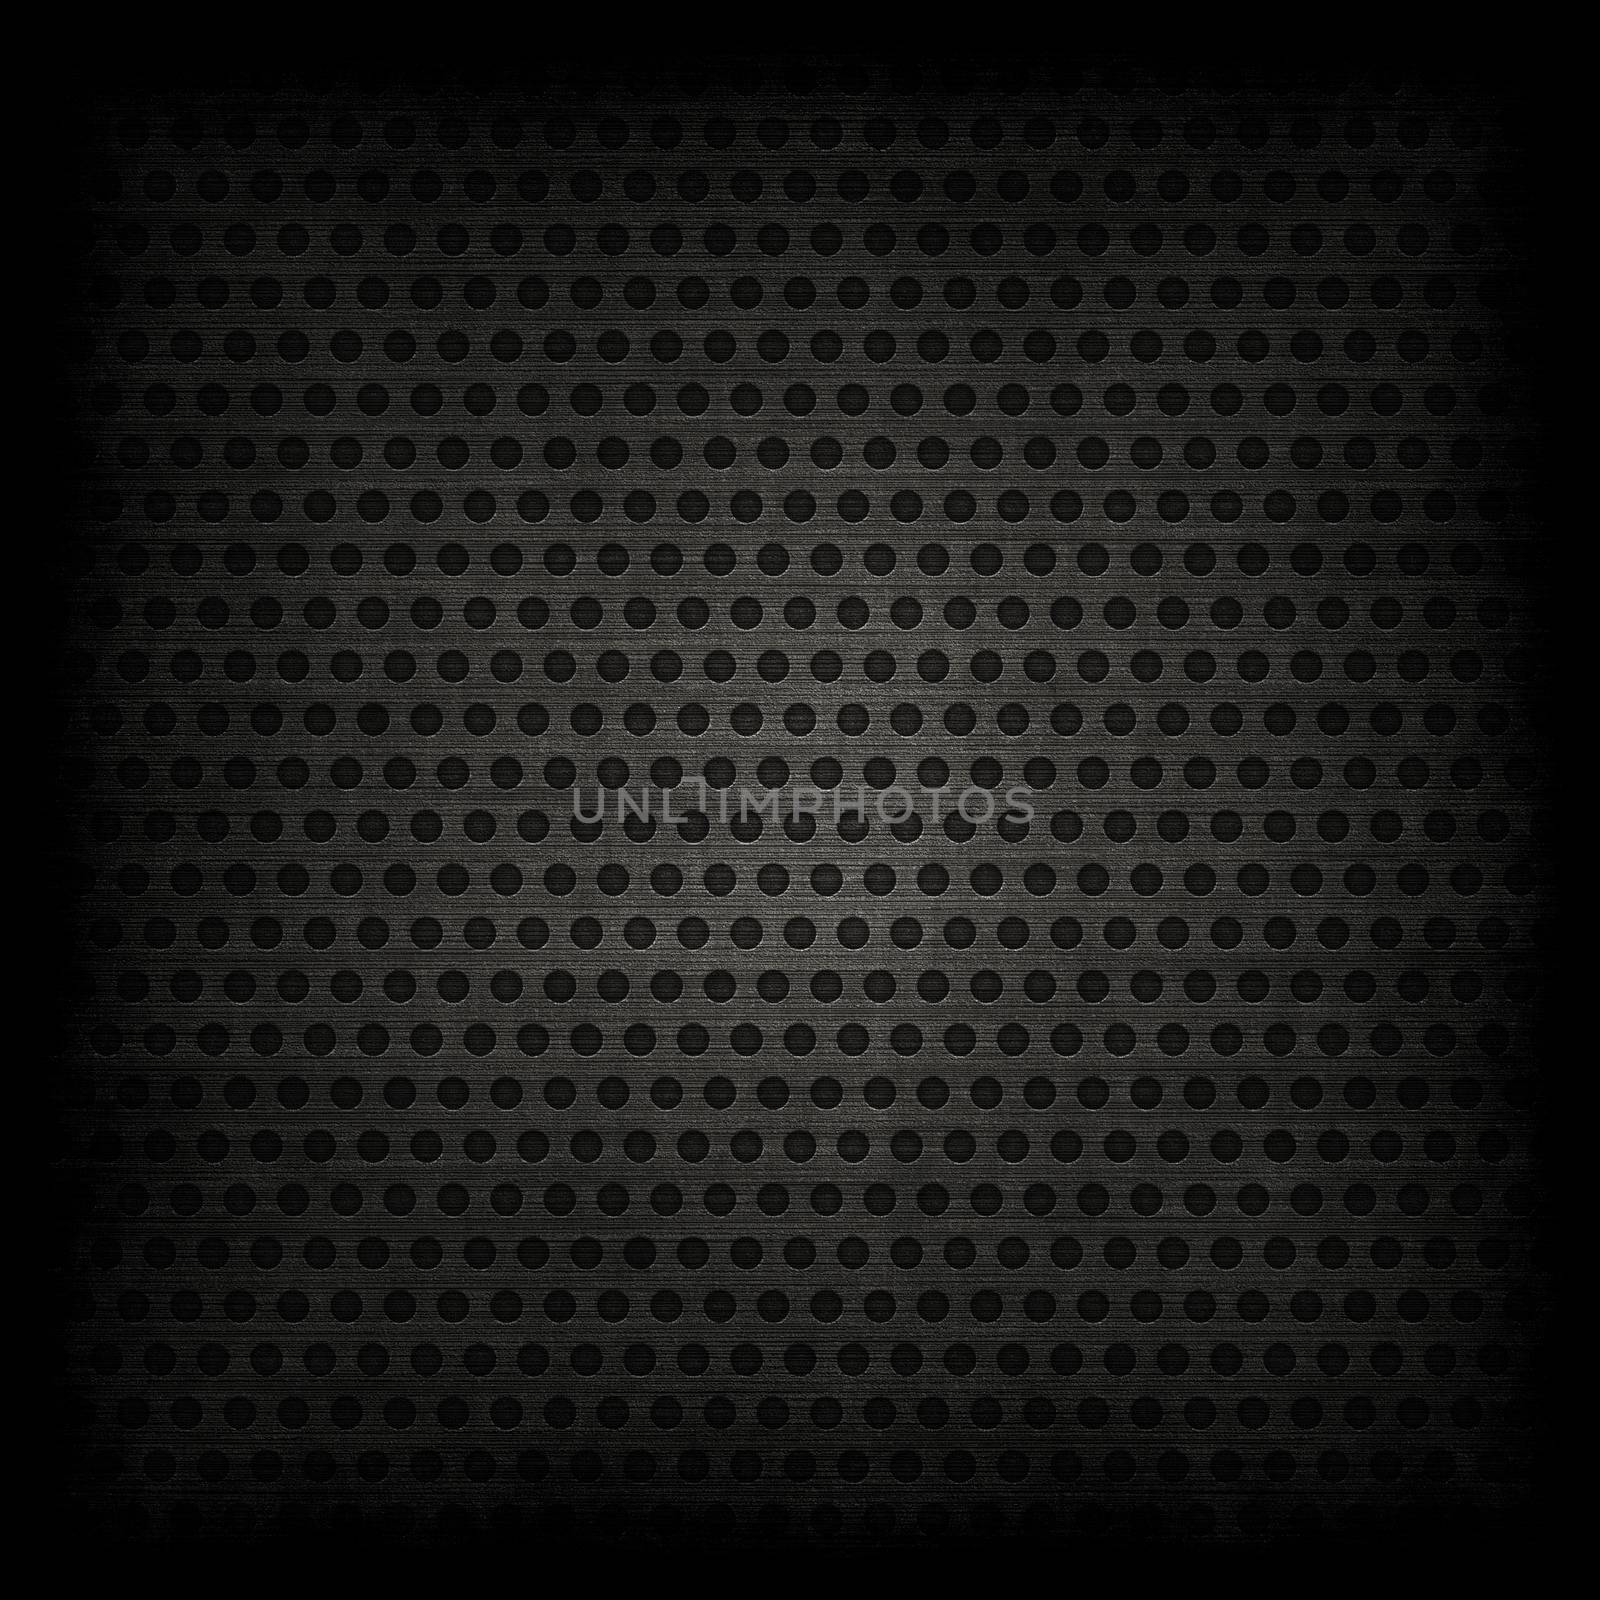 Black circle pattern texture or background by Attila